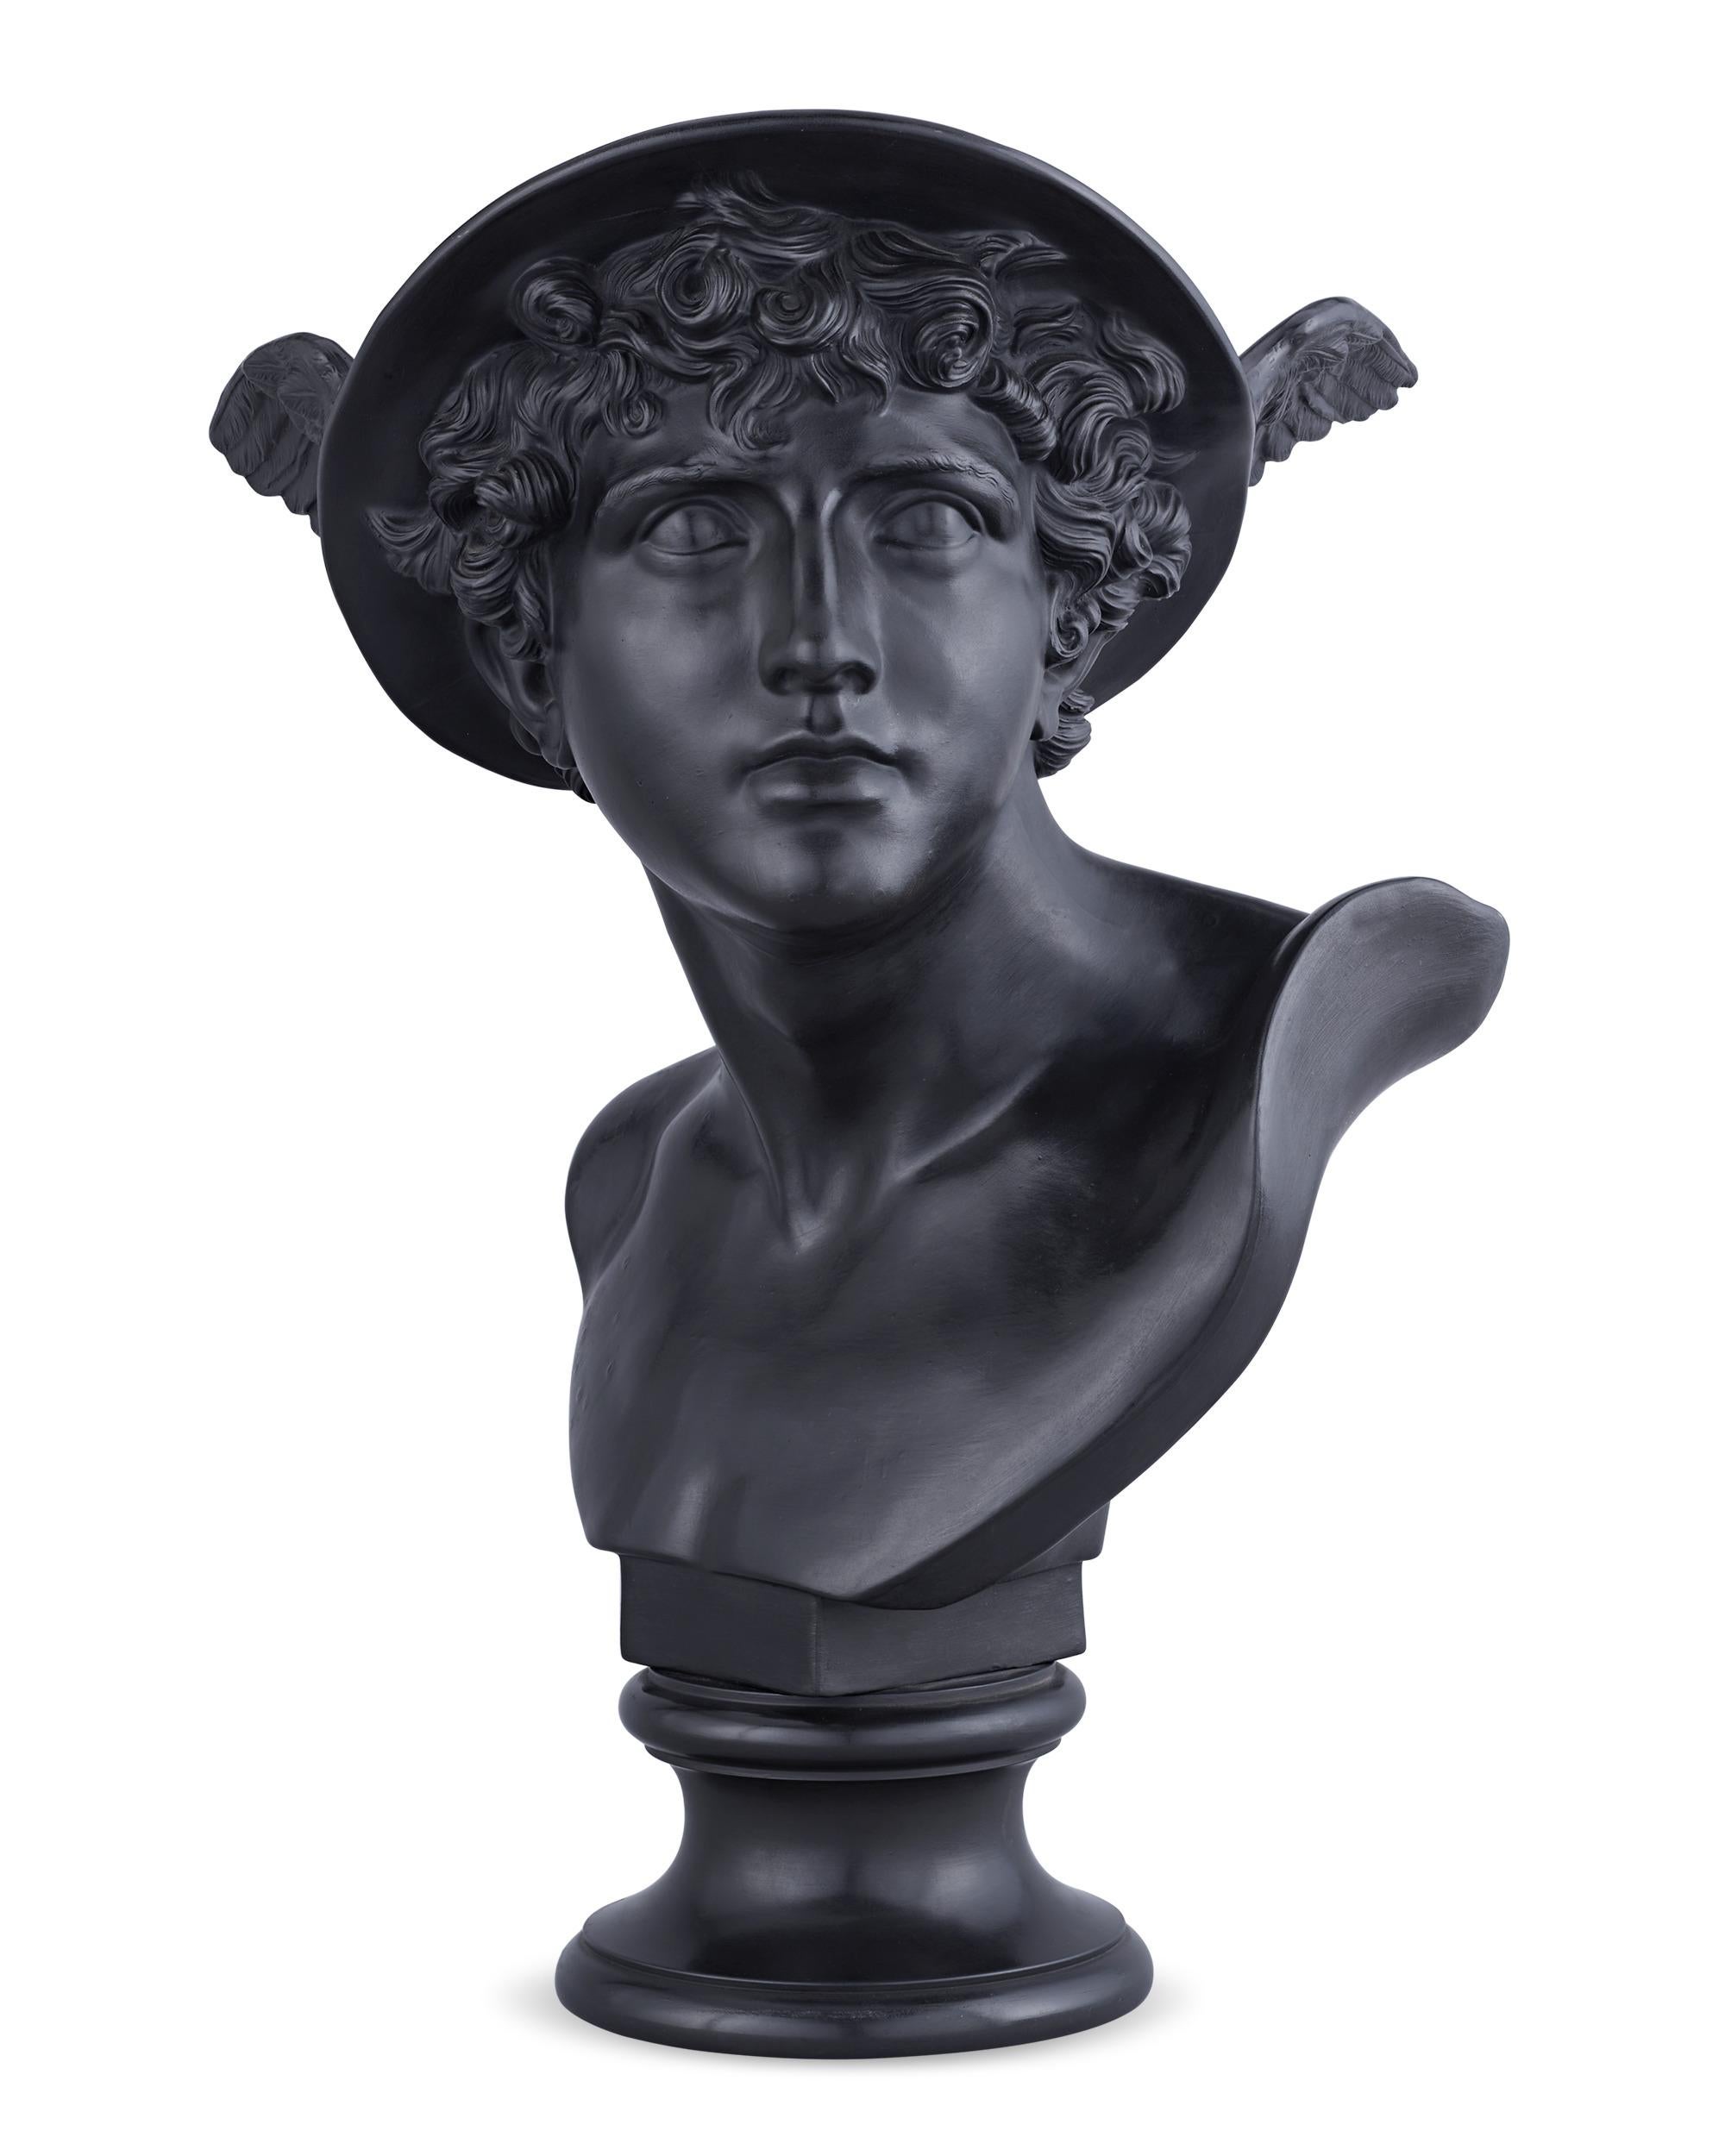 This model is attributed to John Flaxman, Jr., a celebrated English sculptor, illustrator and designer, considered a leading artist in the Neoclassical style in England. In this expertly rendered black basalt bust, Mercury, the fleet-footed Roman